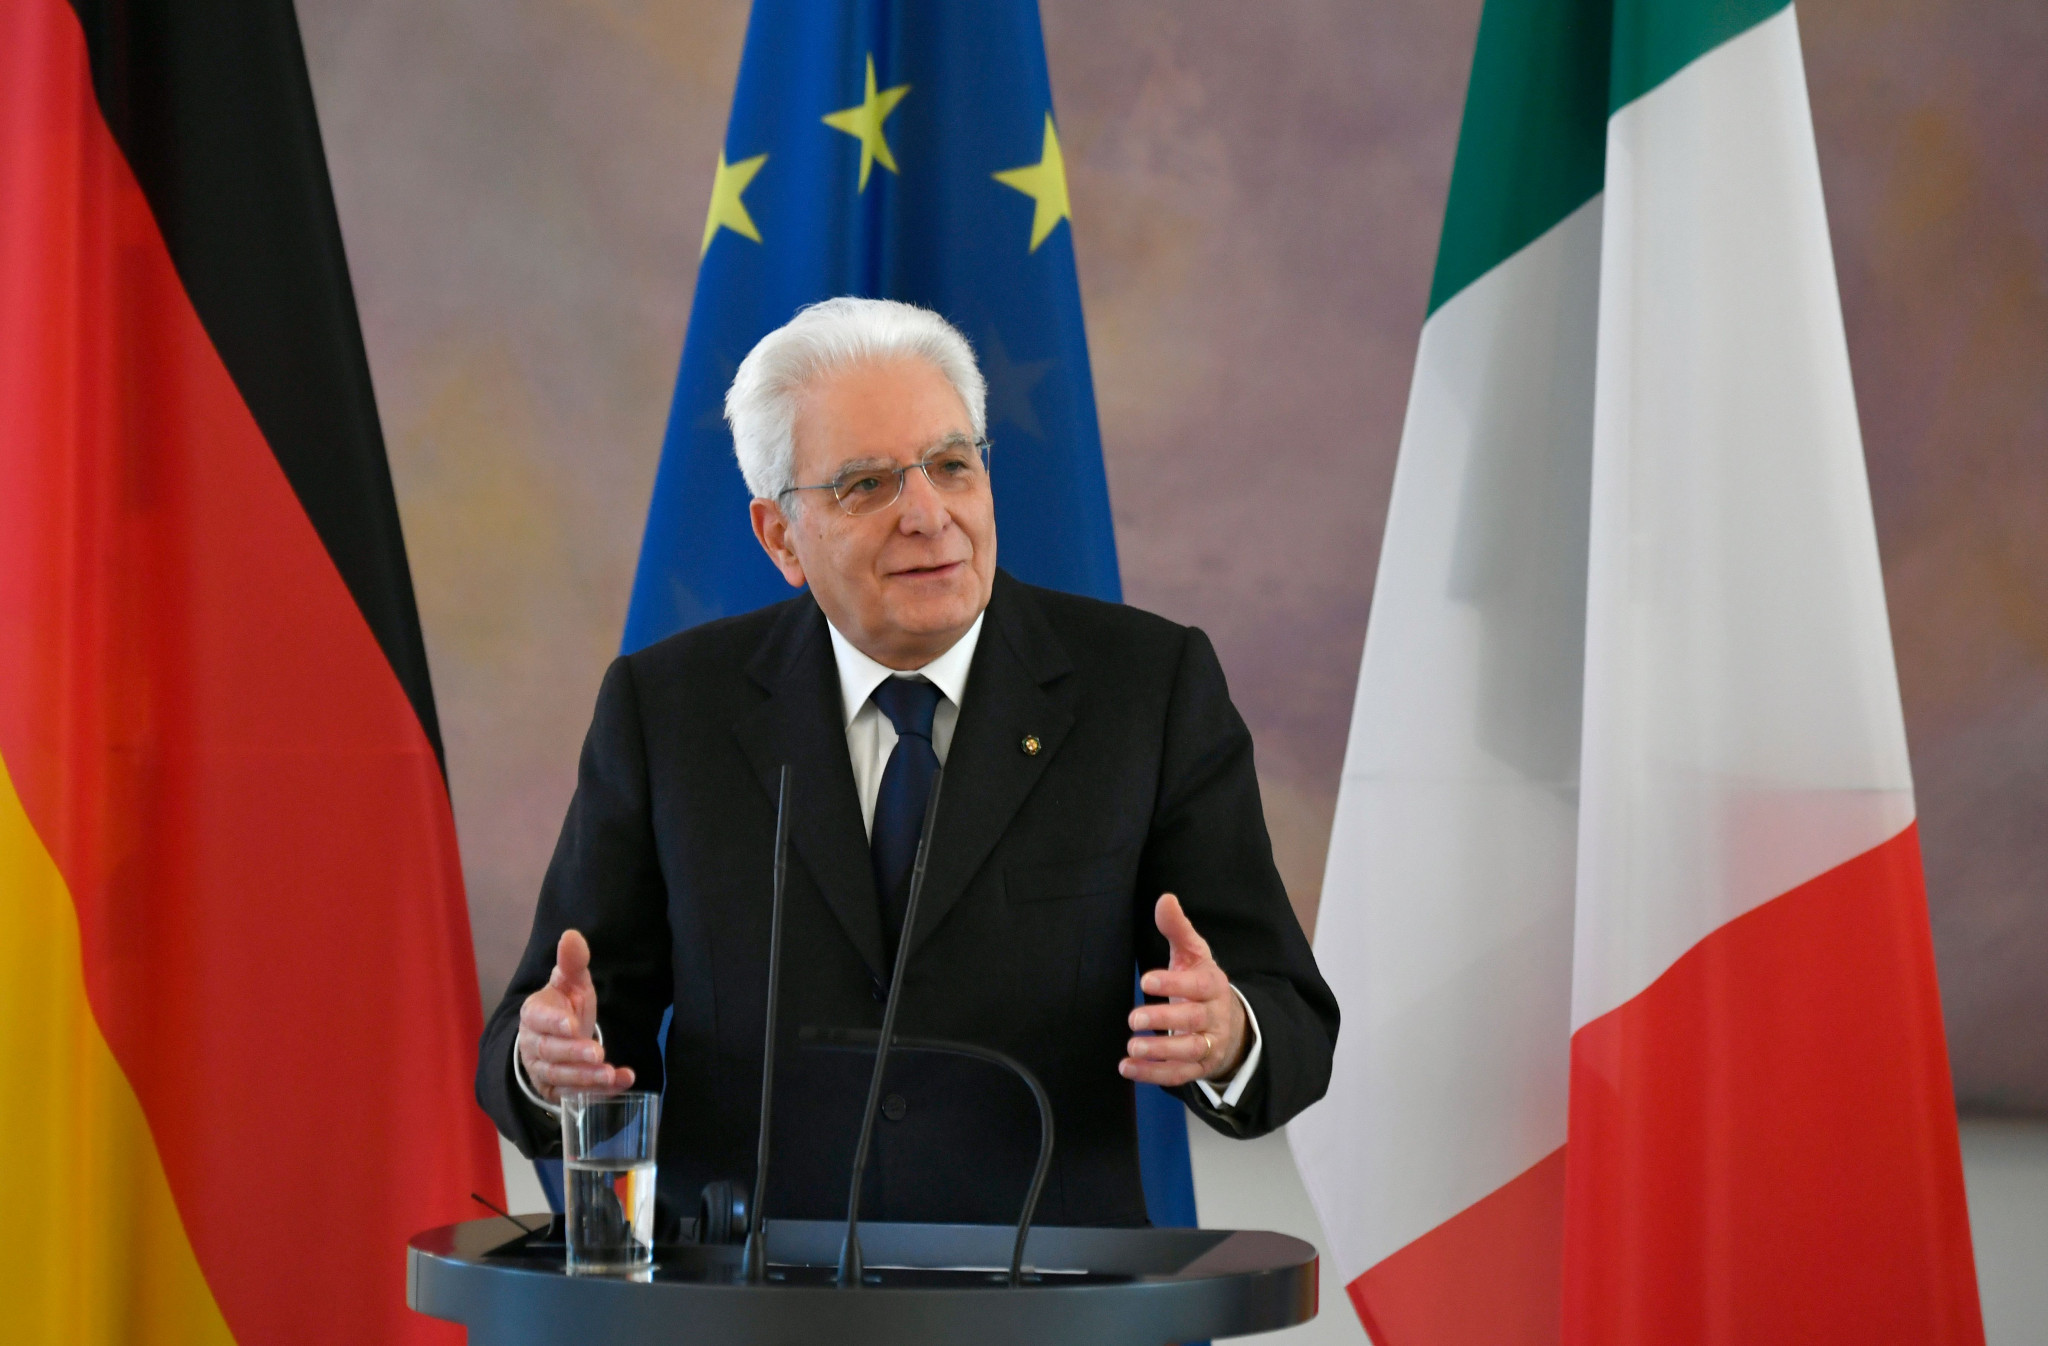 Government commissioned survey predicts financial boost for Italy if